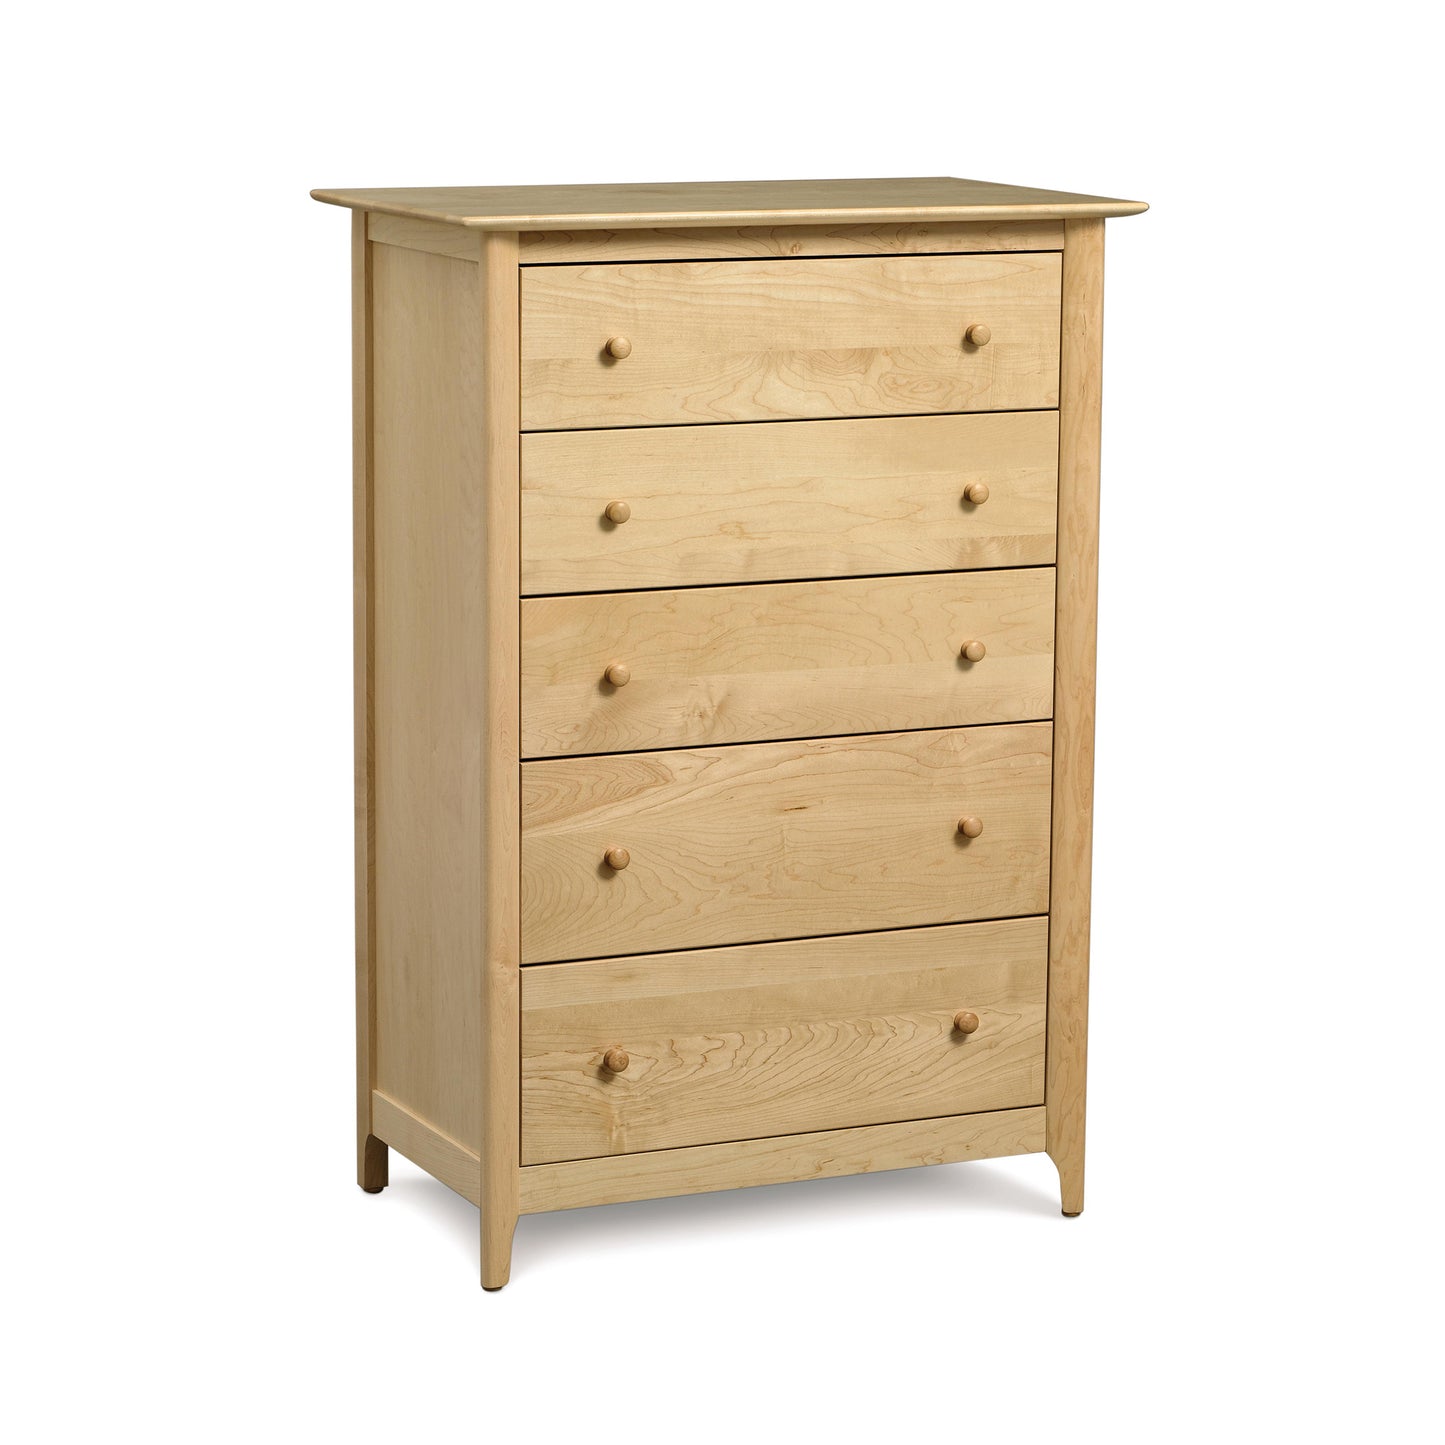 A handmade Sarah 5-Drawer Chest by Copeland Furniture with a classic Shaker design, set on a clean white background.